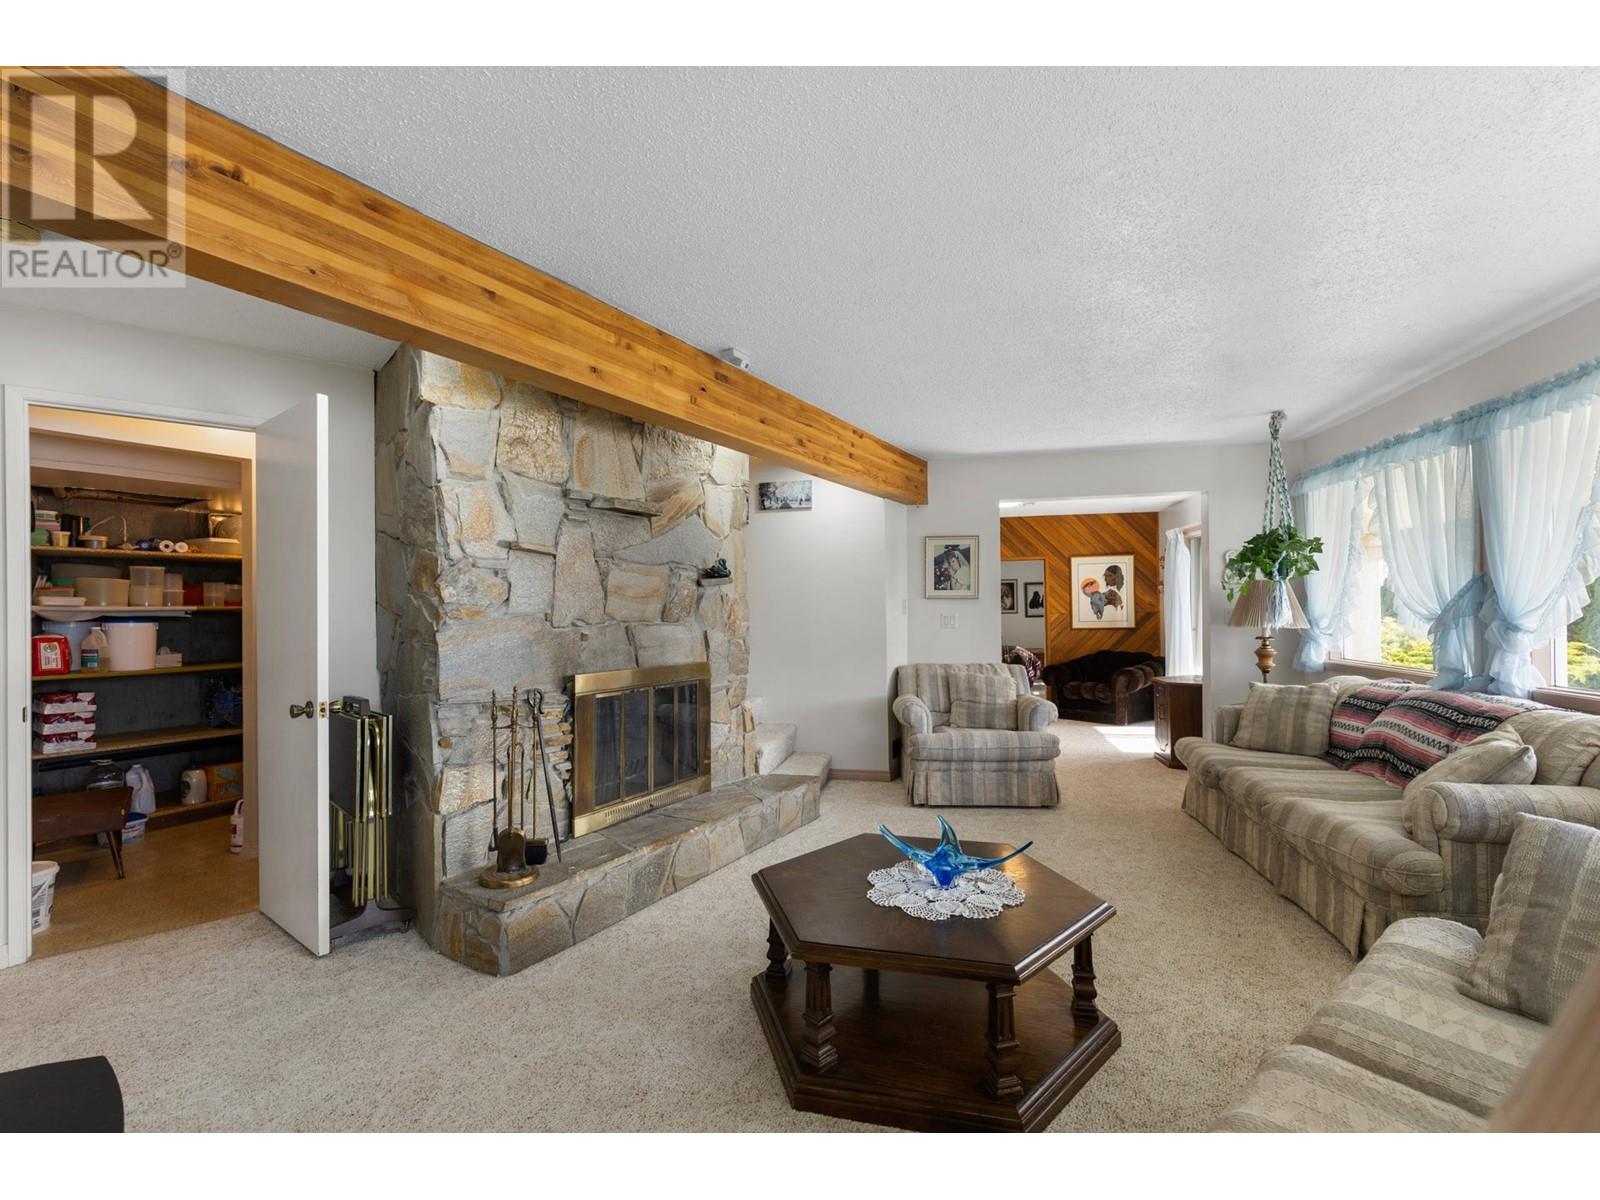  6363 Topham Place, Peachland